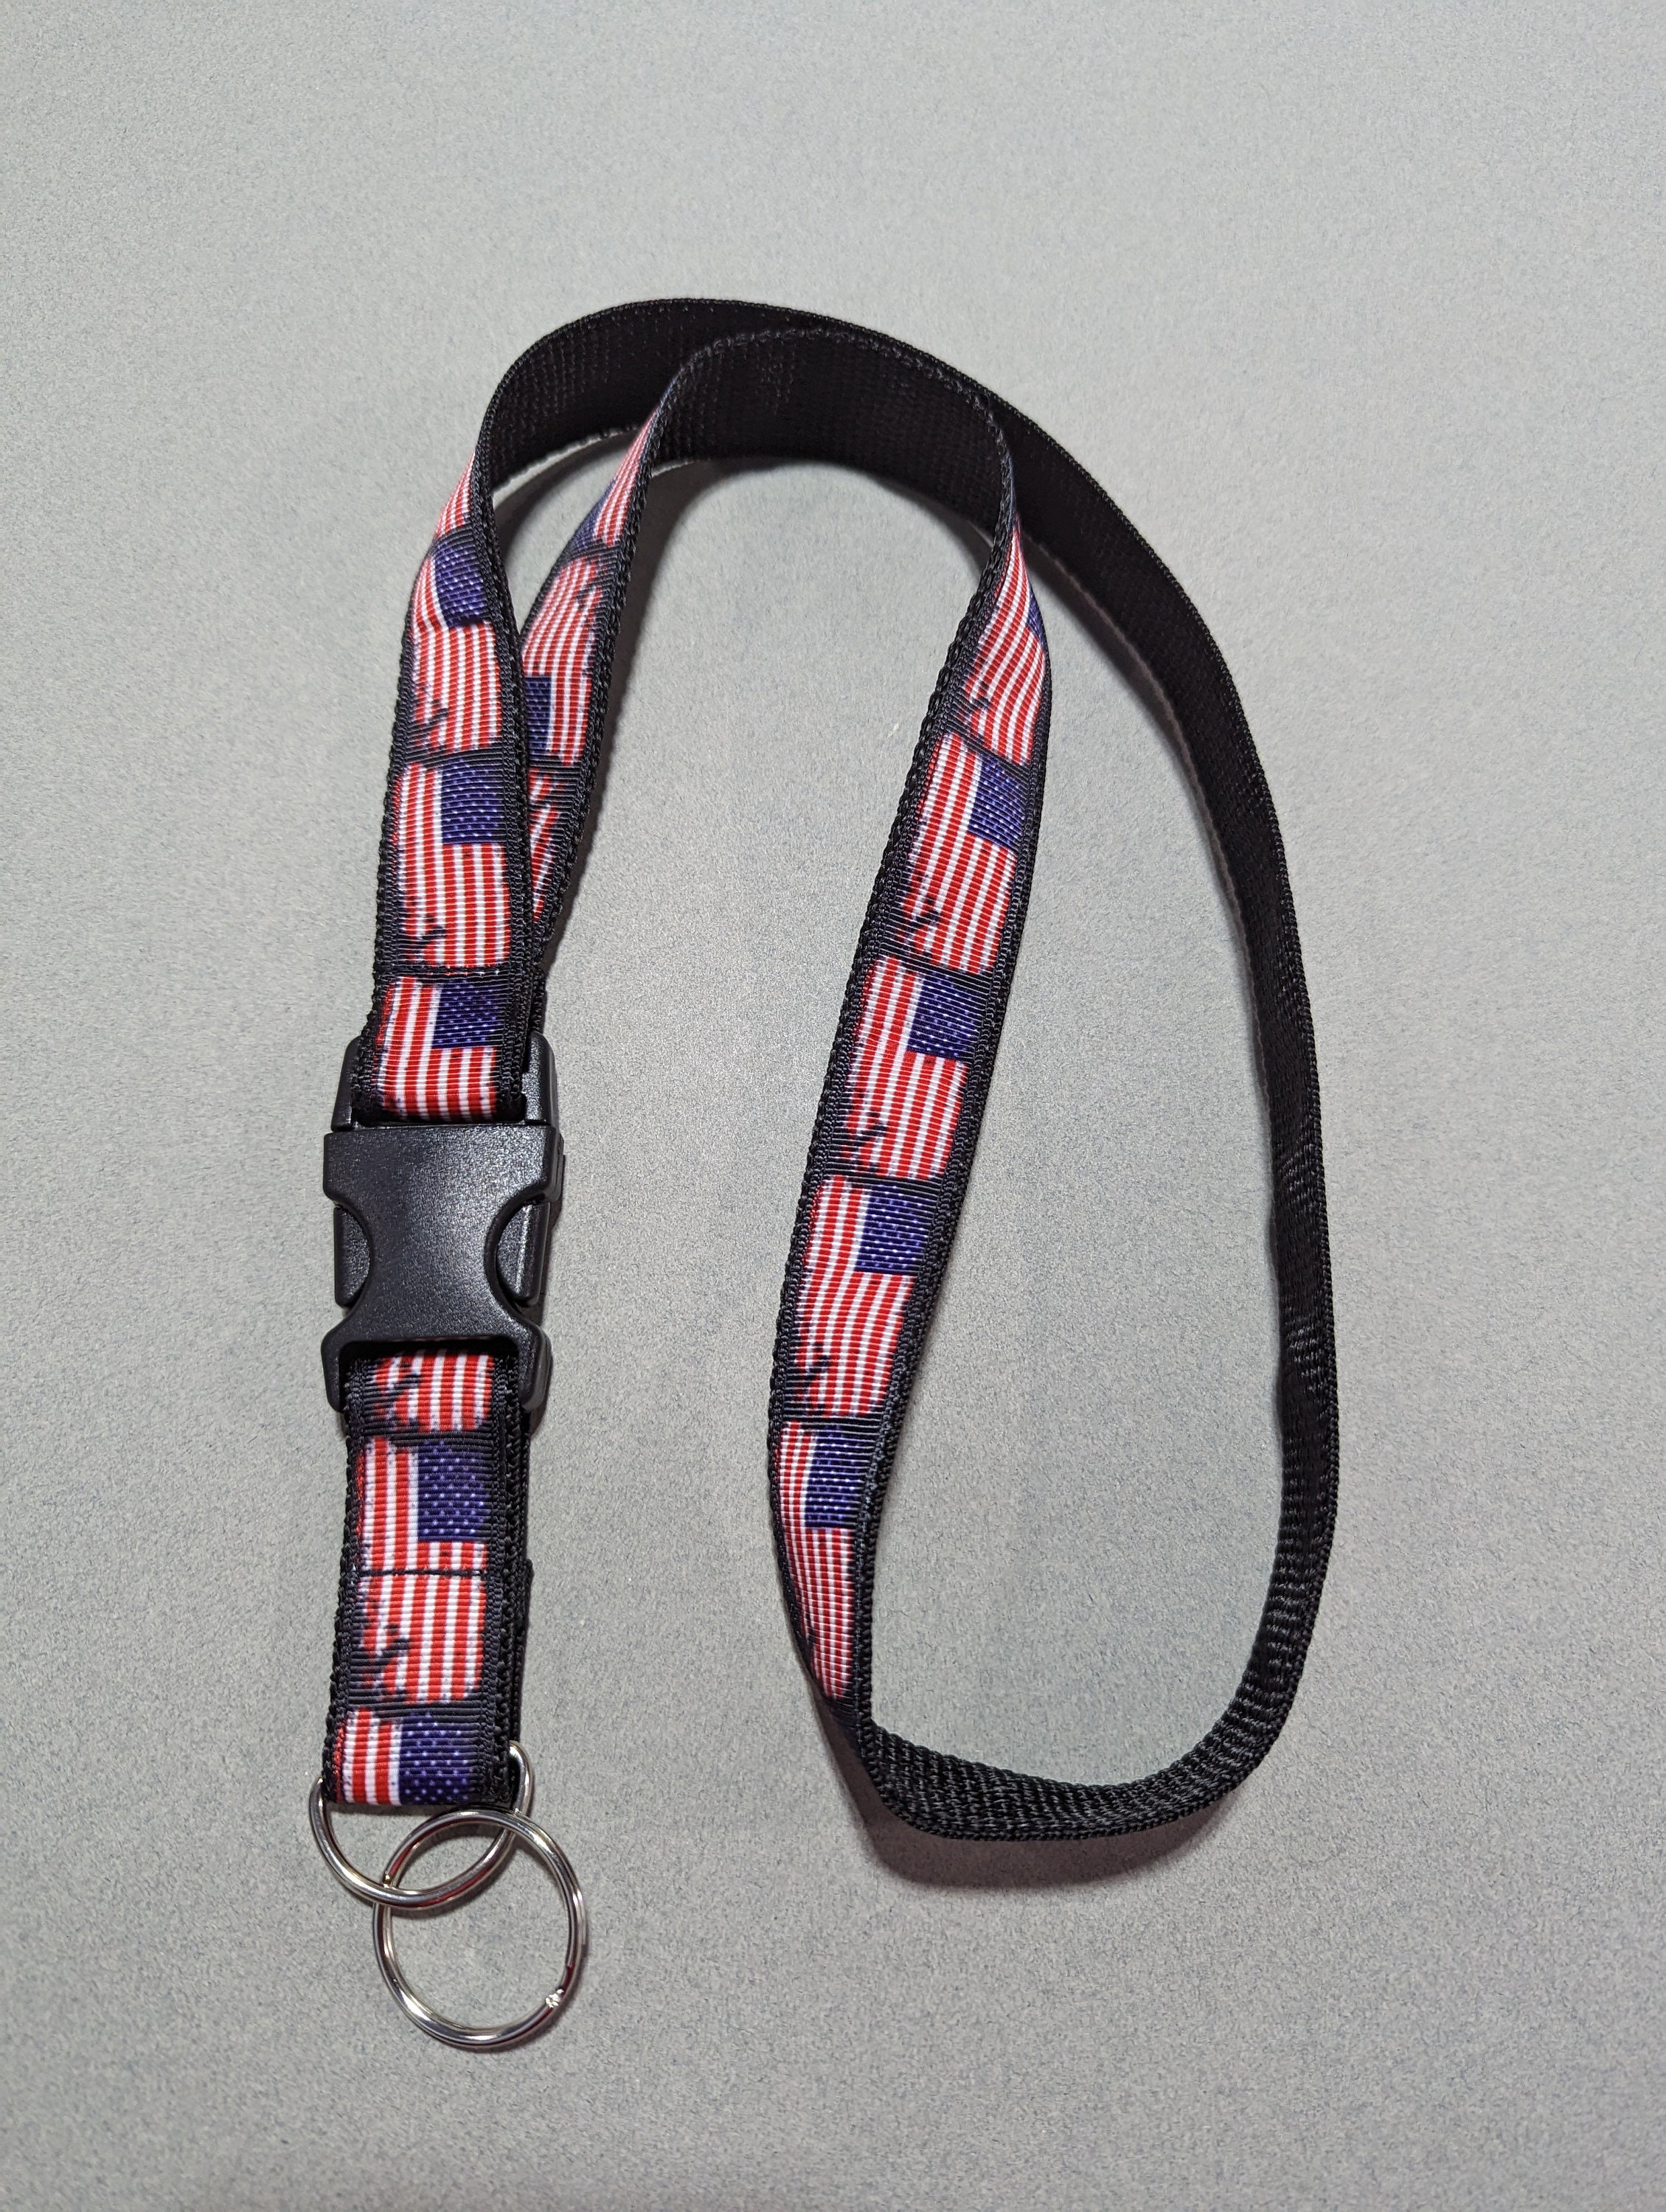  Vinylcation American Flag Lanyard Keychain and ID Holder with  Detachable, Breakaway Buckle for Keys or Badge, Durable Black Polyester